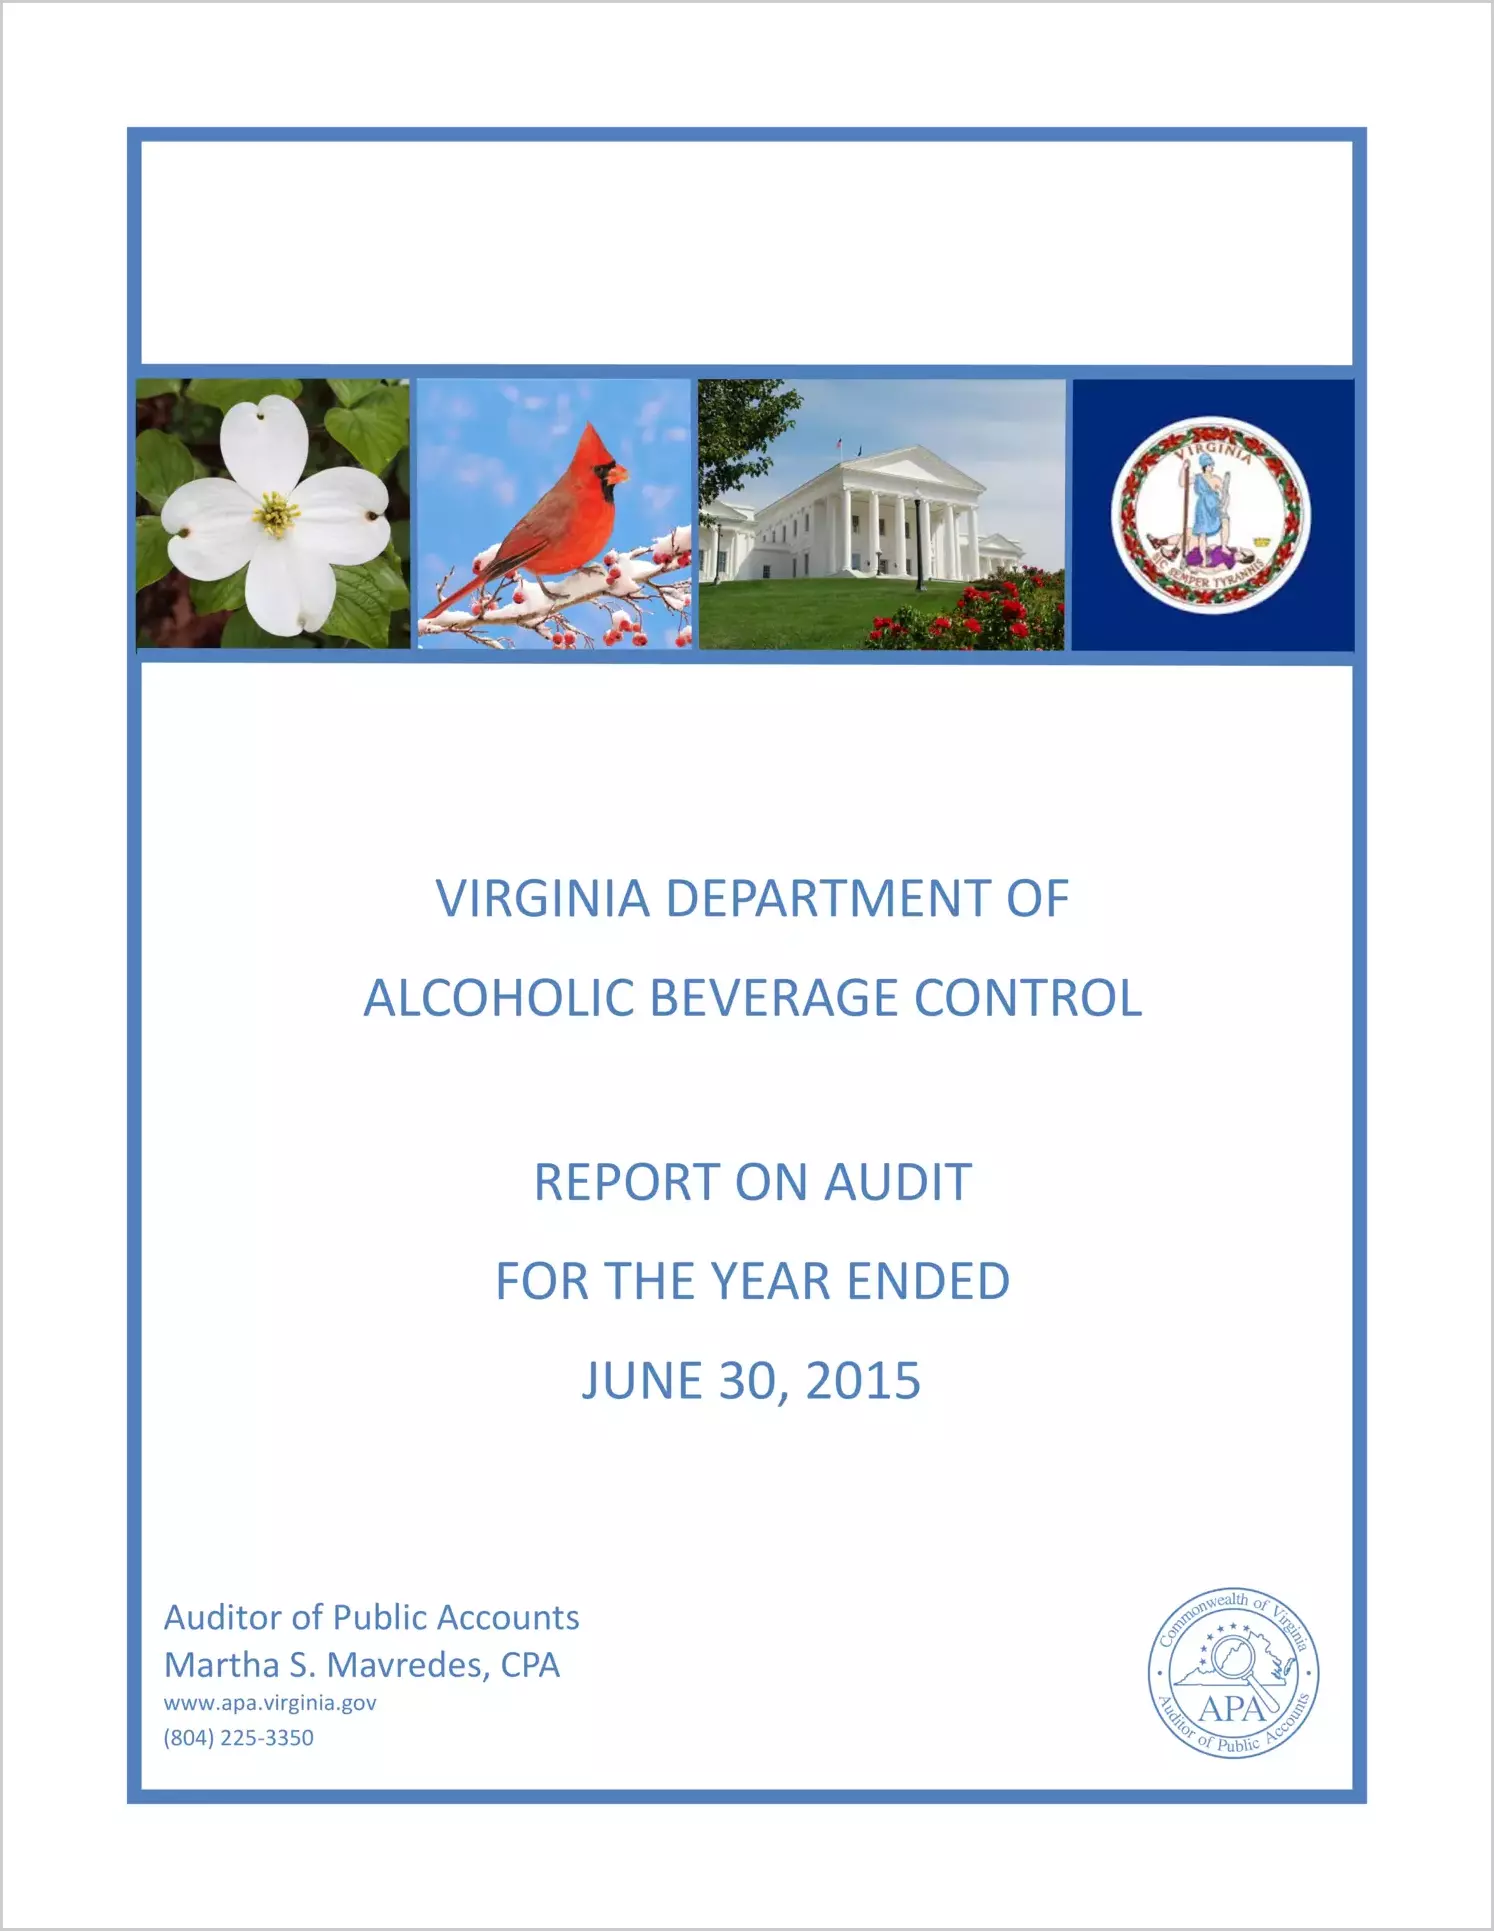 Department of Alcoholic Beverage Control for the year ended June 30, 2015